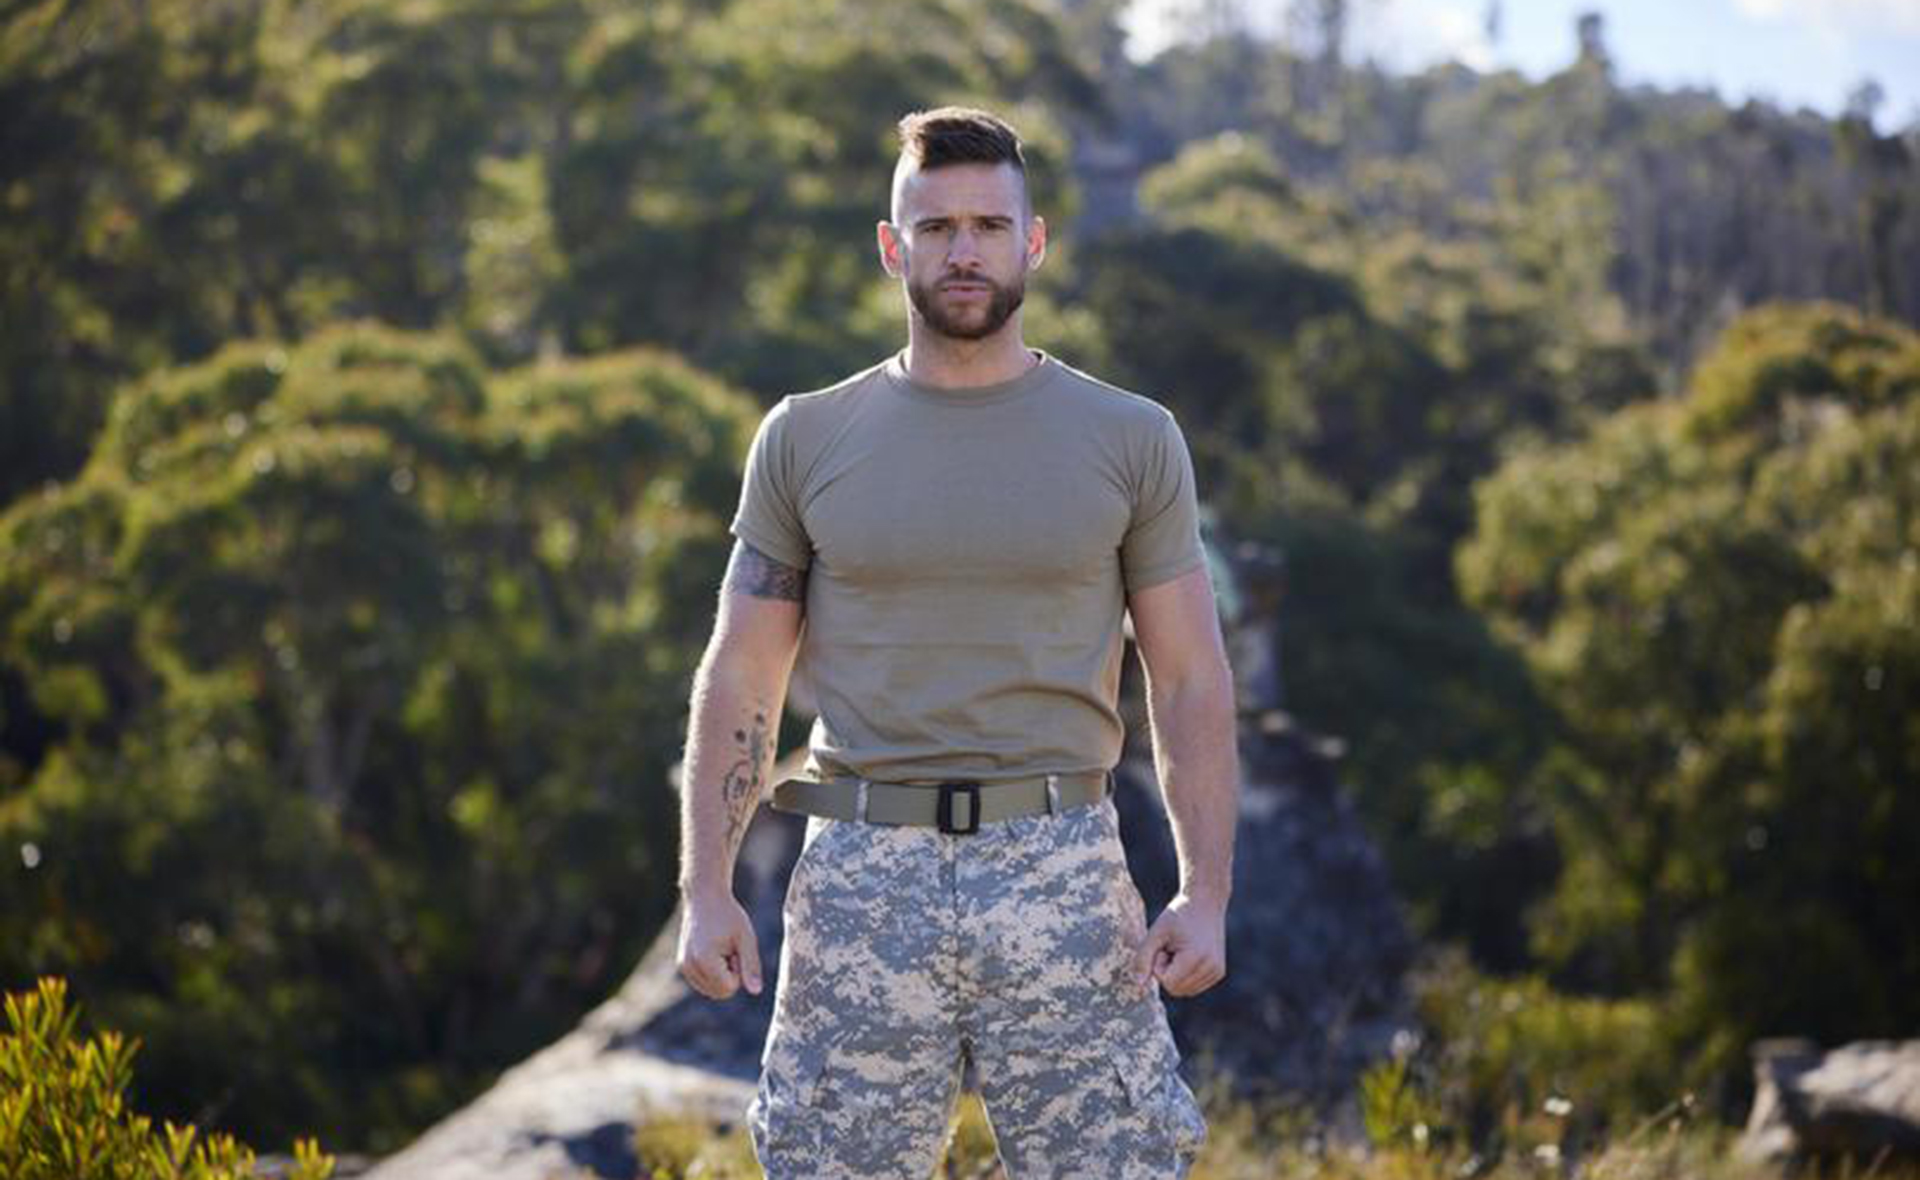 Dan Ewing is brutally reprimanded by the DS on SAS Australia’s most explosive interrogation yet